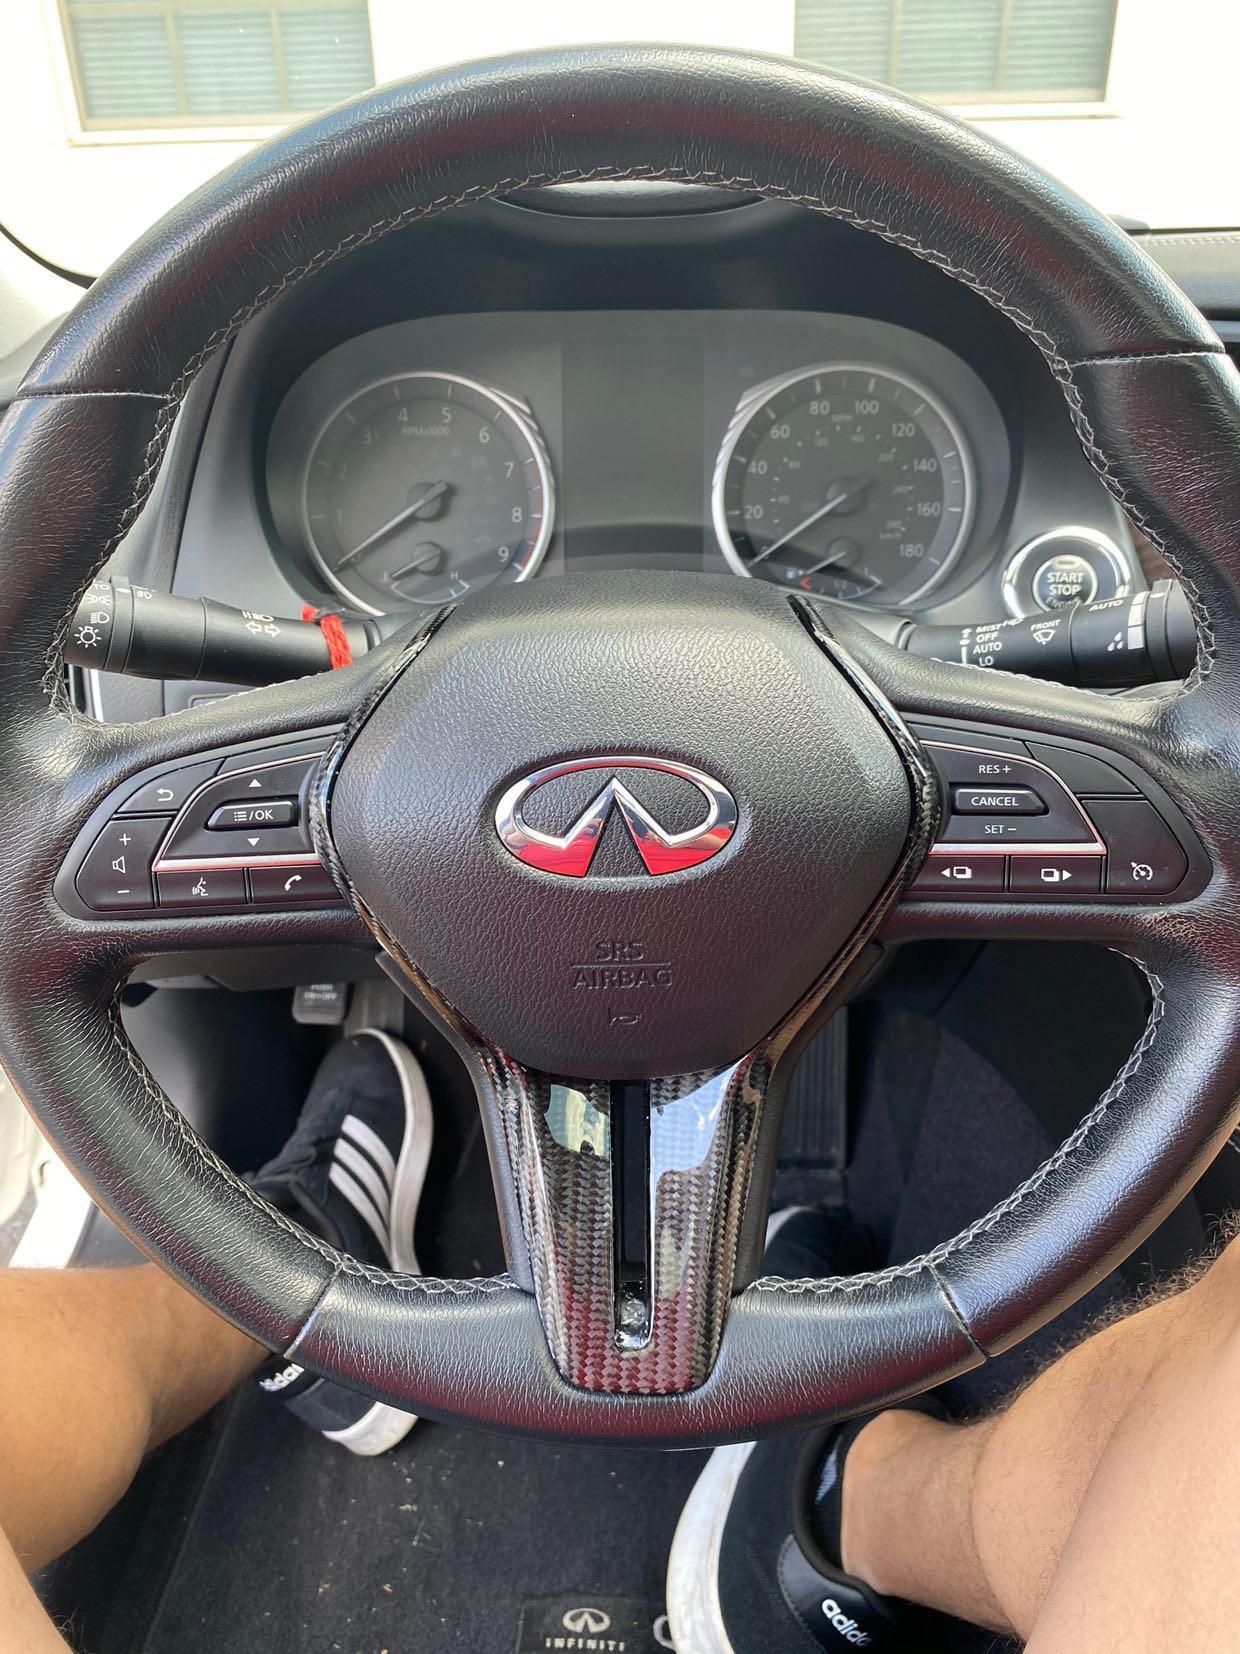 Jalisco's carbon fiber trim for the Infiniti Q50 steering wheel: a high-gloss, intricately woven carbon pattern enhancing the wheel's aesthetics, reflecting premium craftsmanship and elegance.